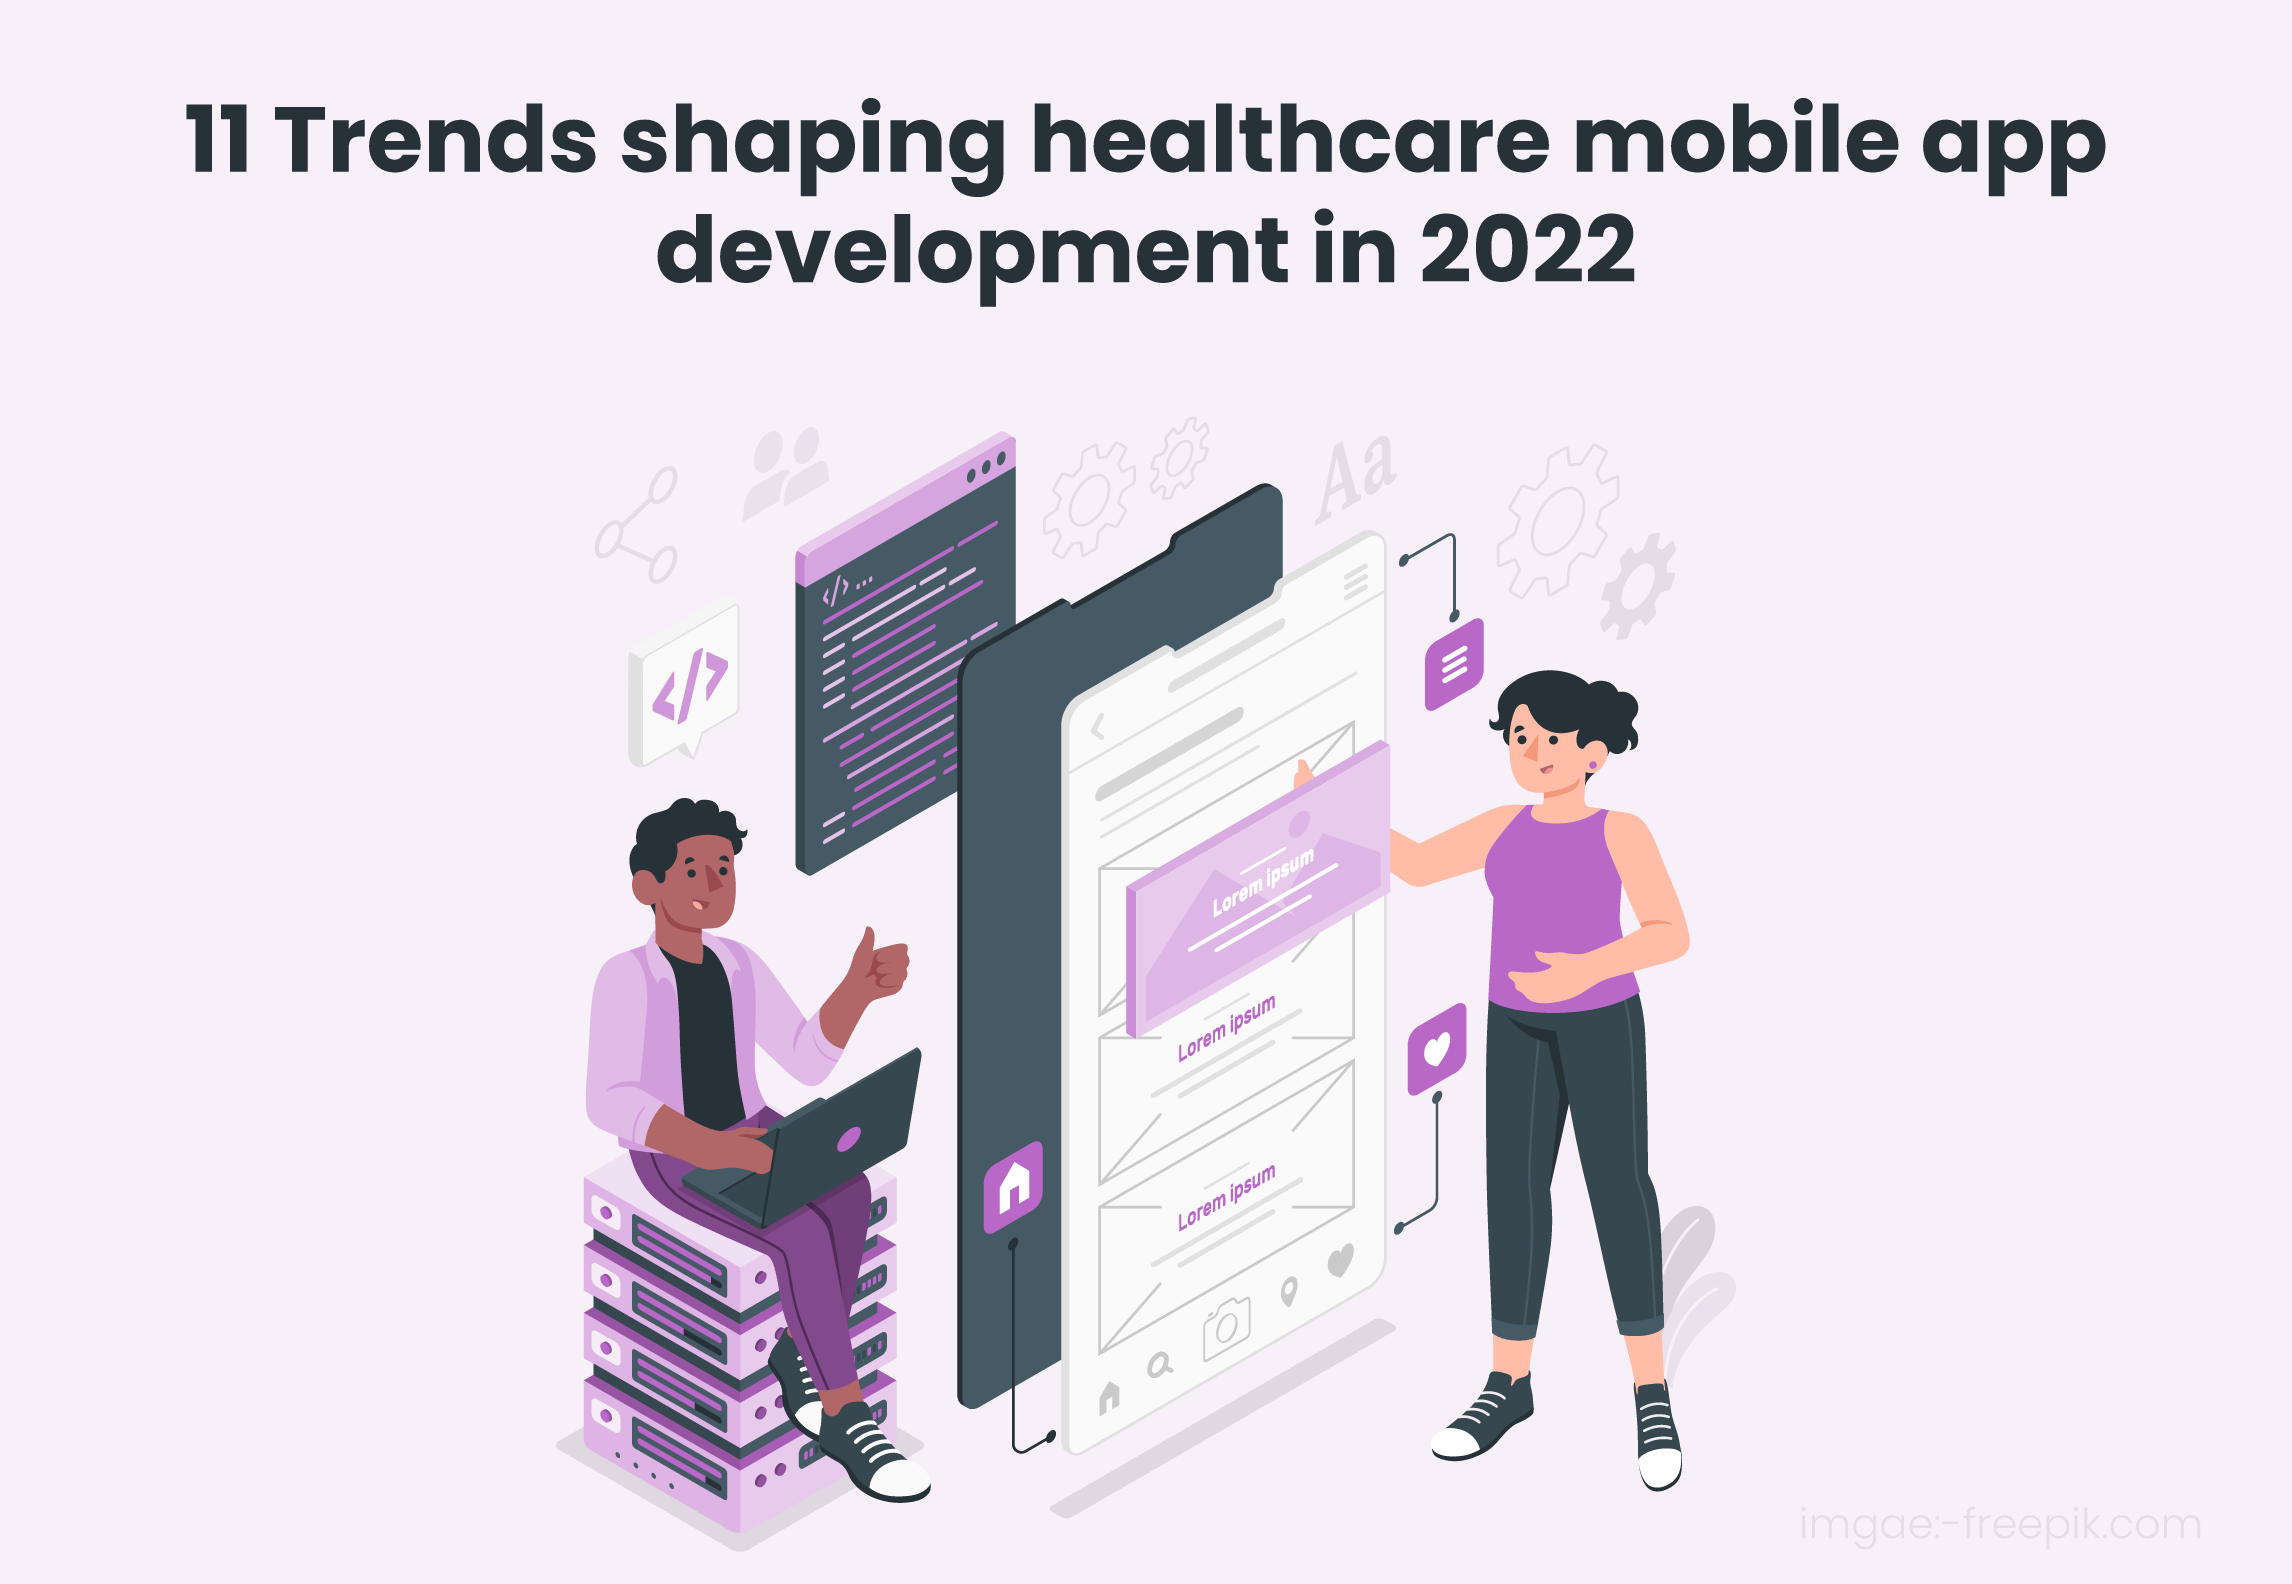 11 Trends shaping healthcare mobile app development in 2022